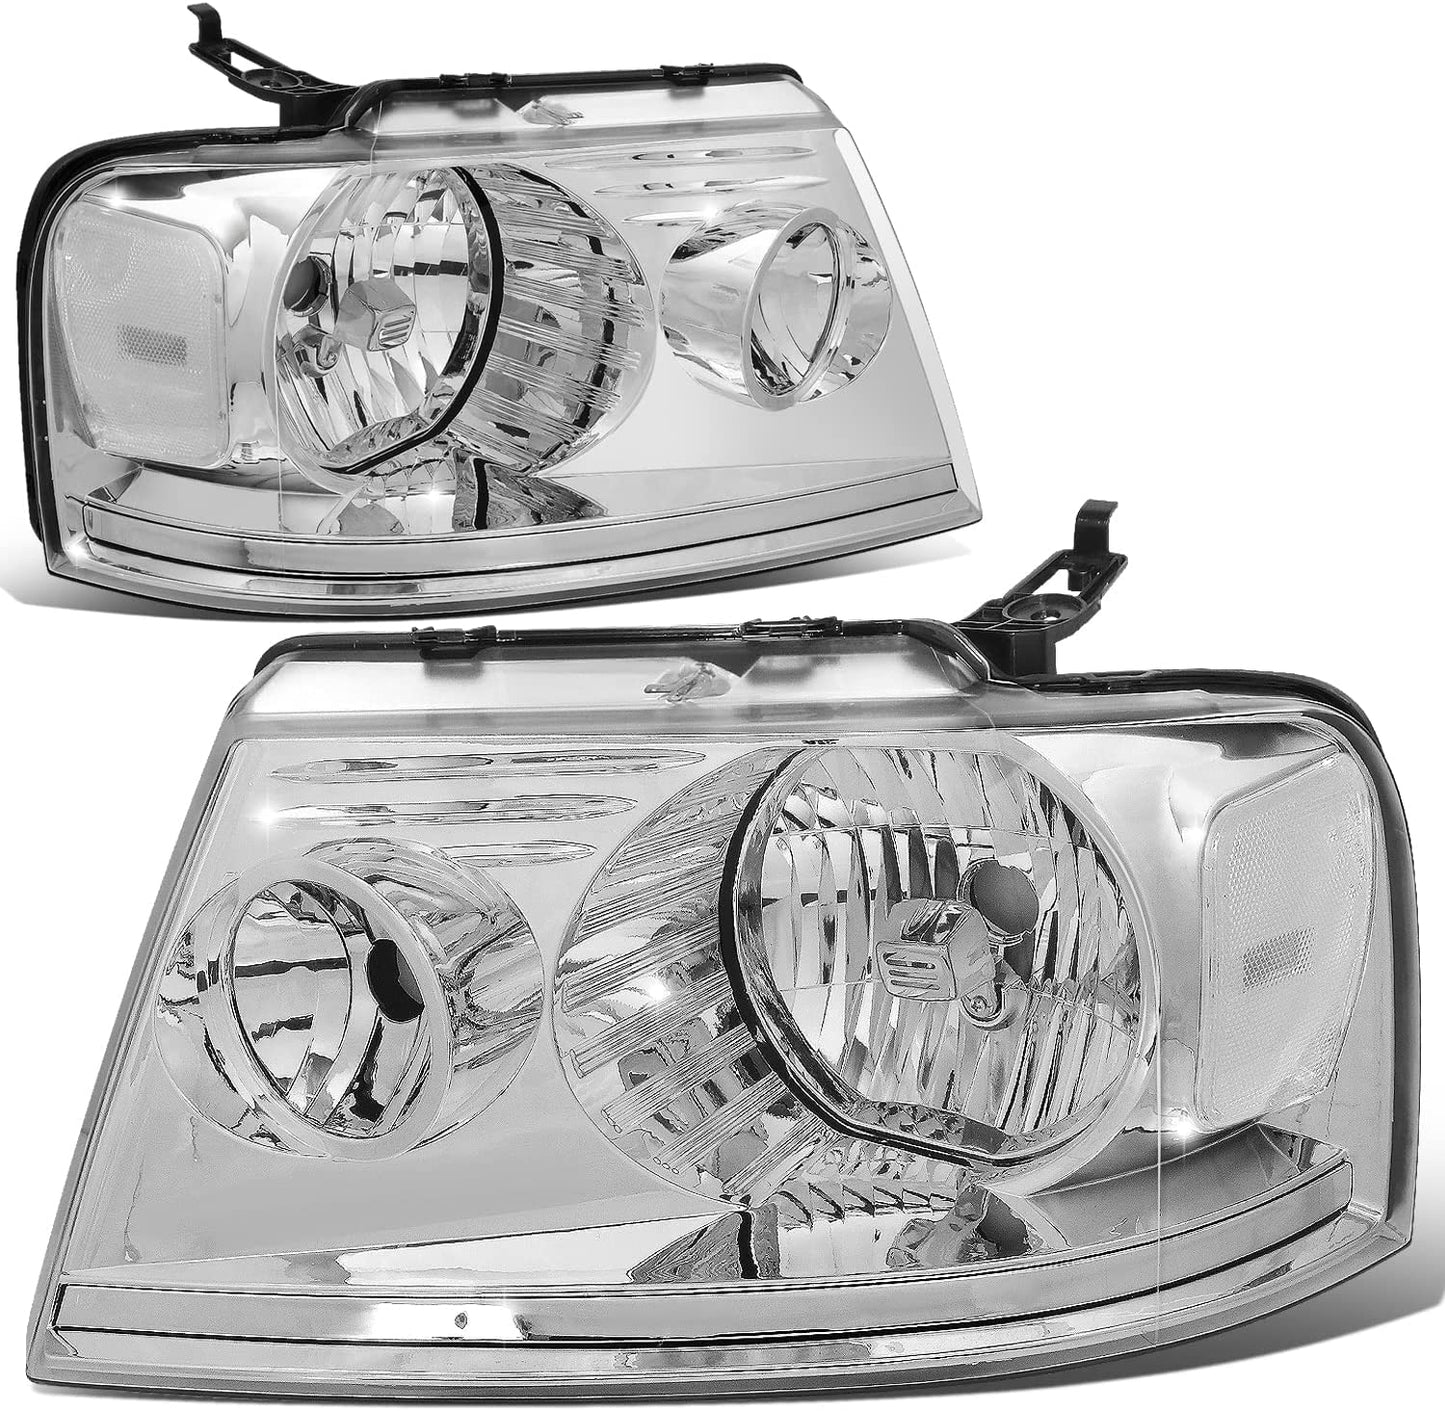 DNA MOTORING HL-OH-F1504-CH-AM Chrome Amber Headlights Replacement Compatible with 04-08 F-150/06-08 Mark LT